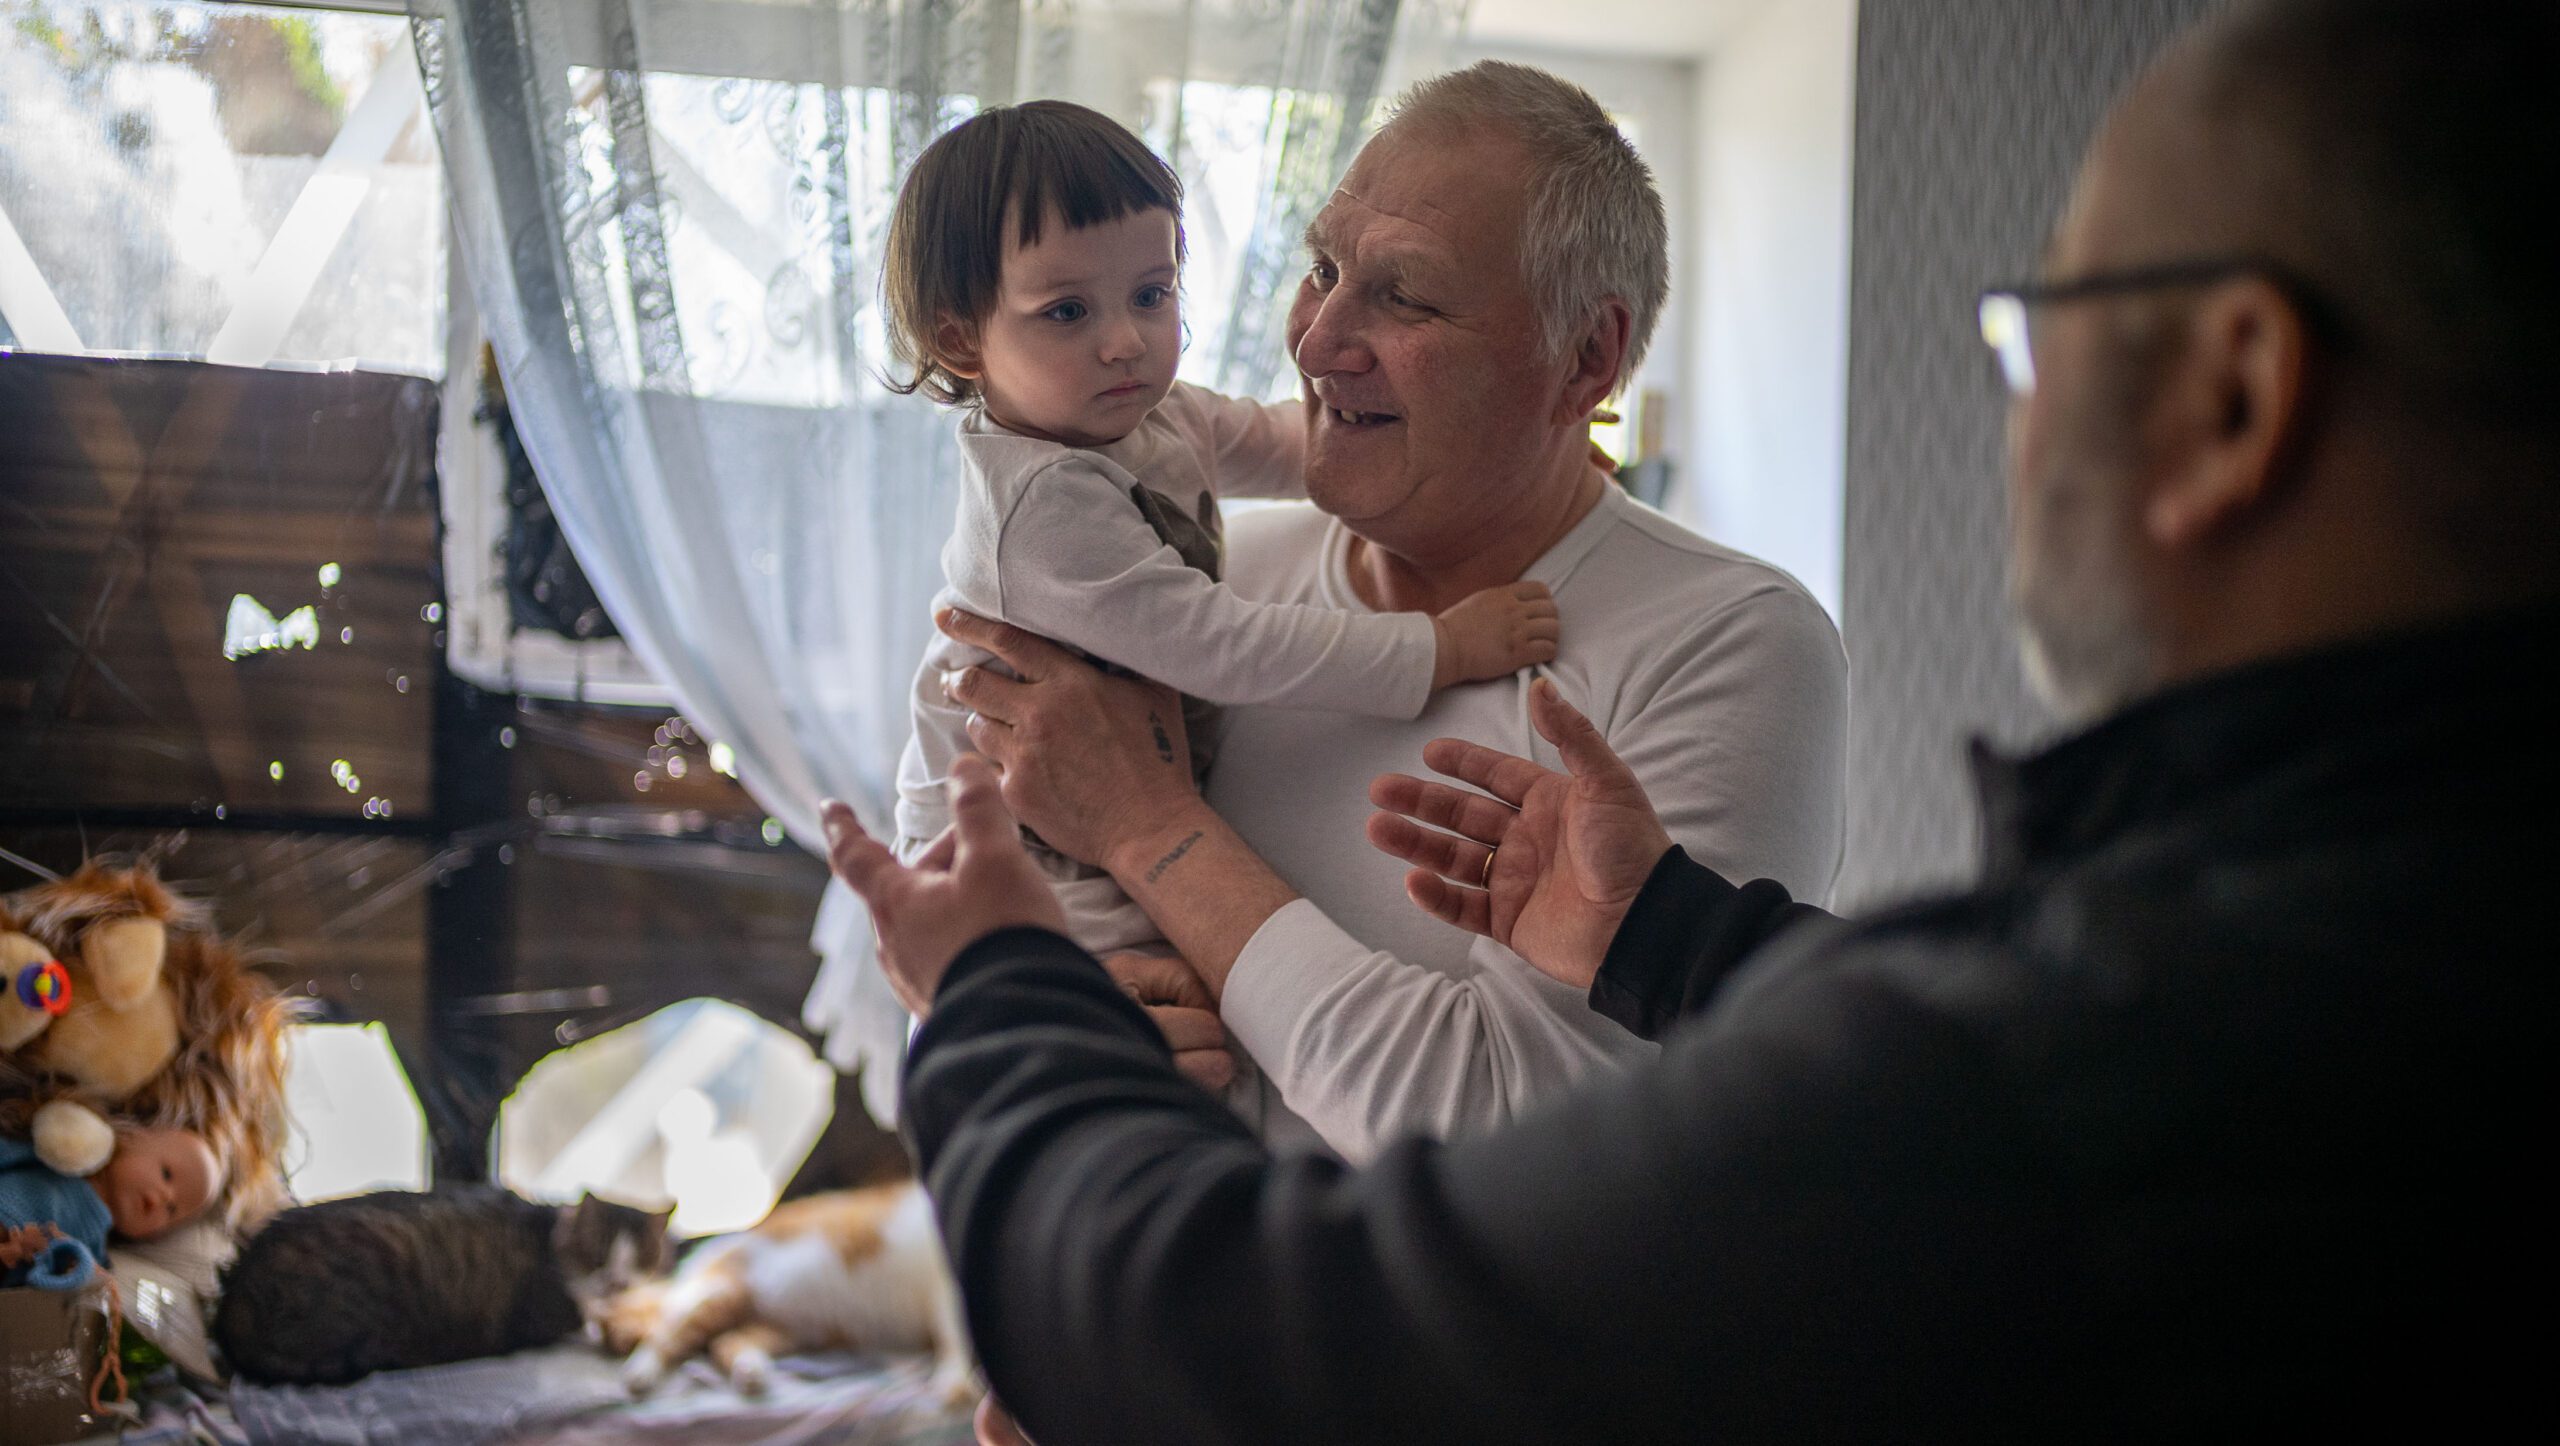 May 2, 2022
Vinnytsia, Ukraine

Anatoly from Kostyantynivka in Donetsk Oblast and his granddaughter are among the over 250 Internally Displaced People are living at the Vinnytsia No. 1 Center for Professional-Technical Education, a technical college. 

PHOTOGRAPH by ALAN CHIN